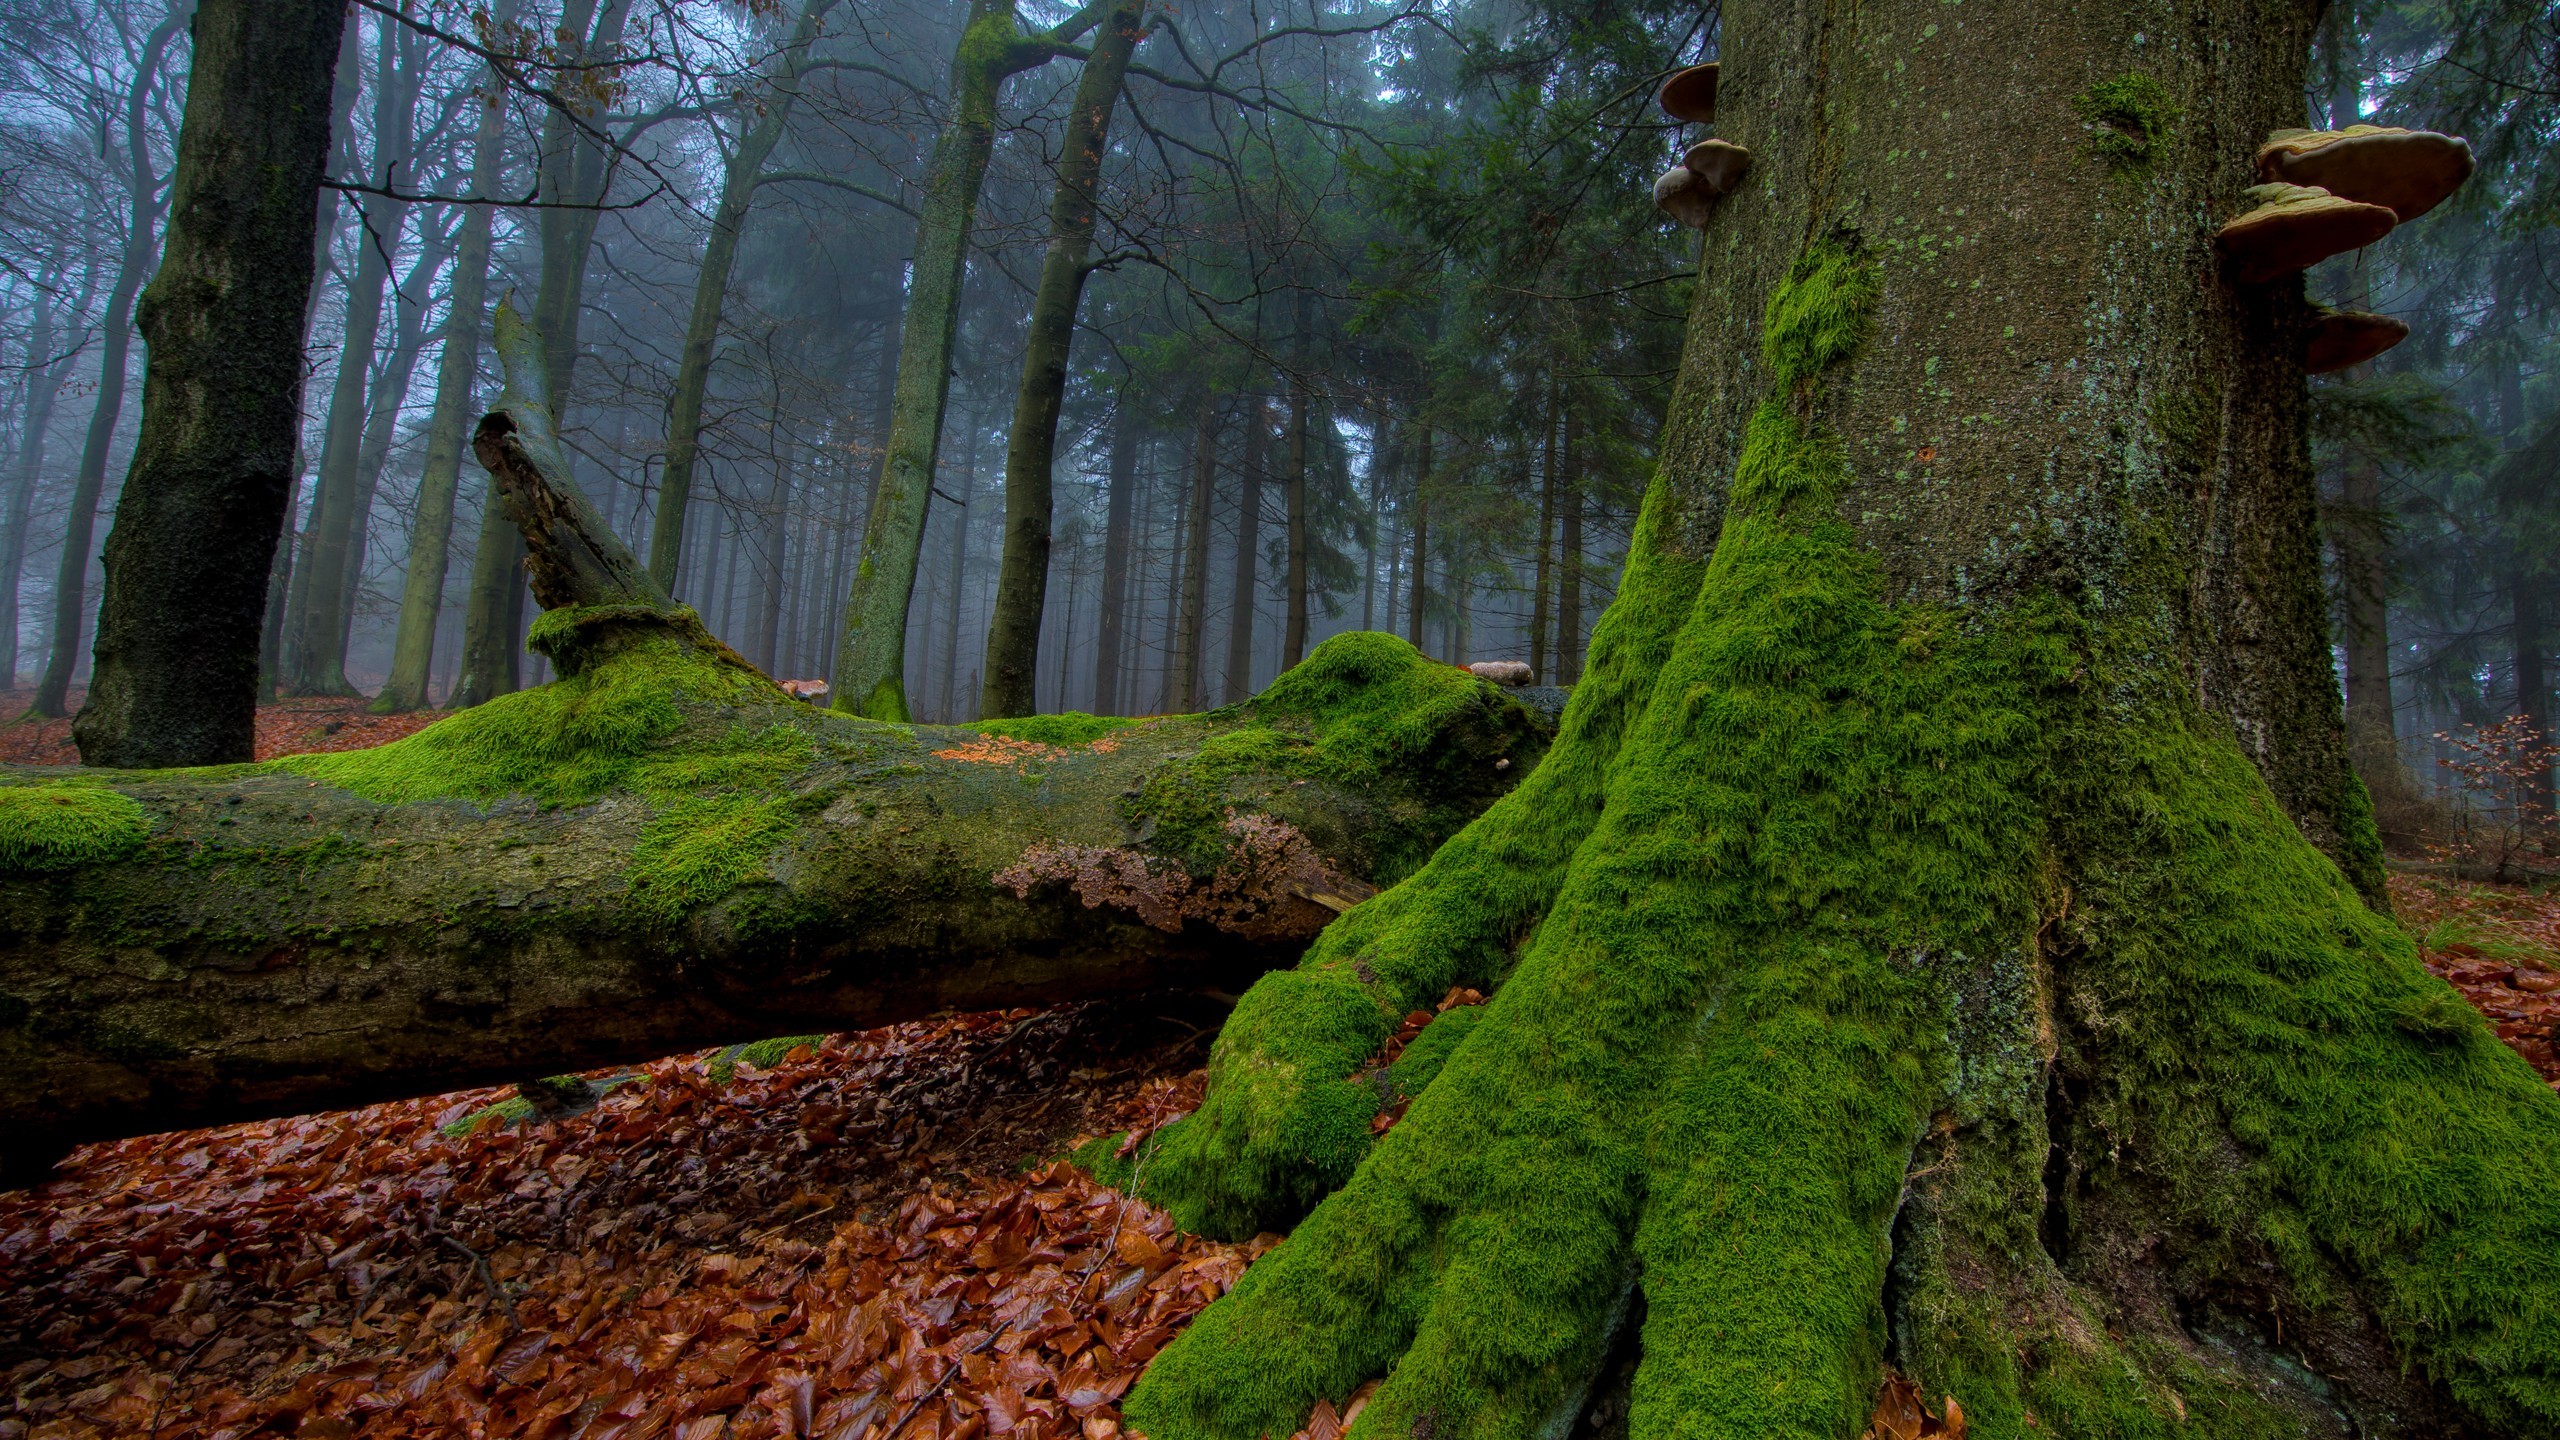 General 2560x1440 nature trees moss plants outdoors leaves forest fallen leaves fall